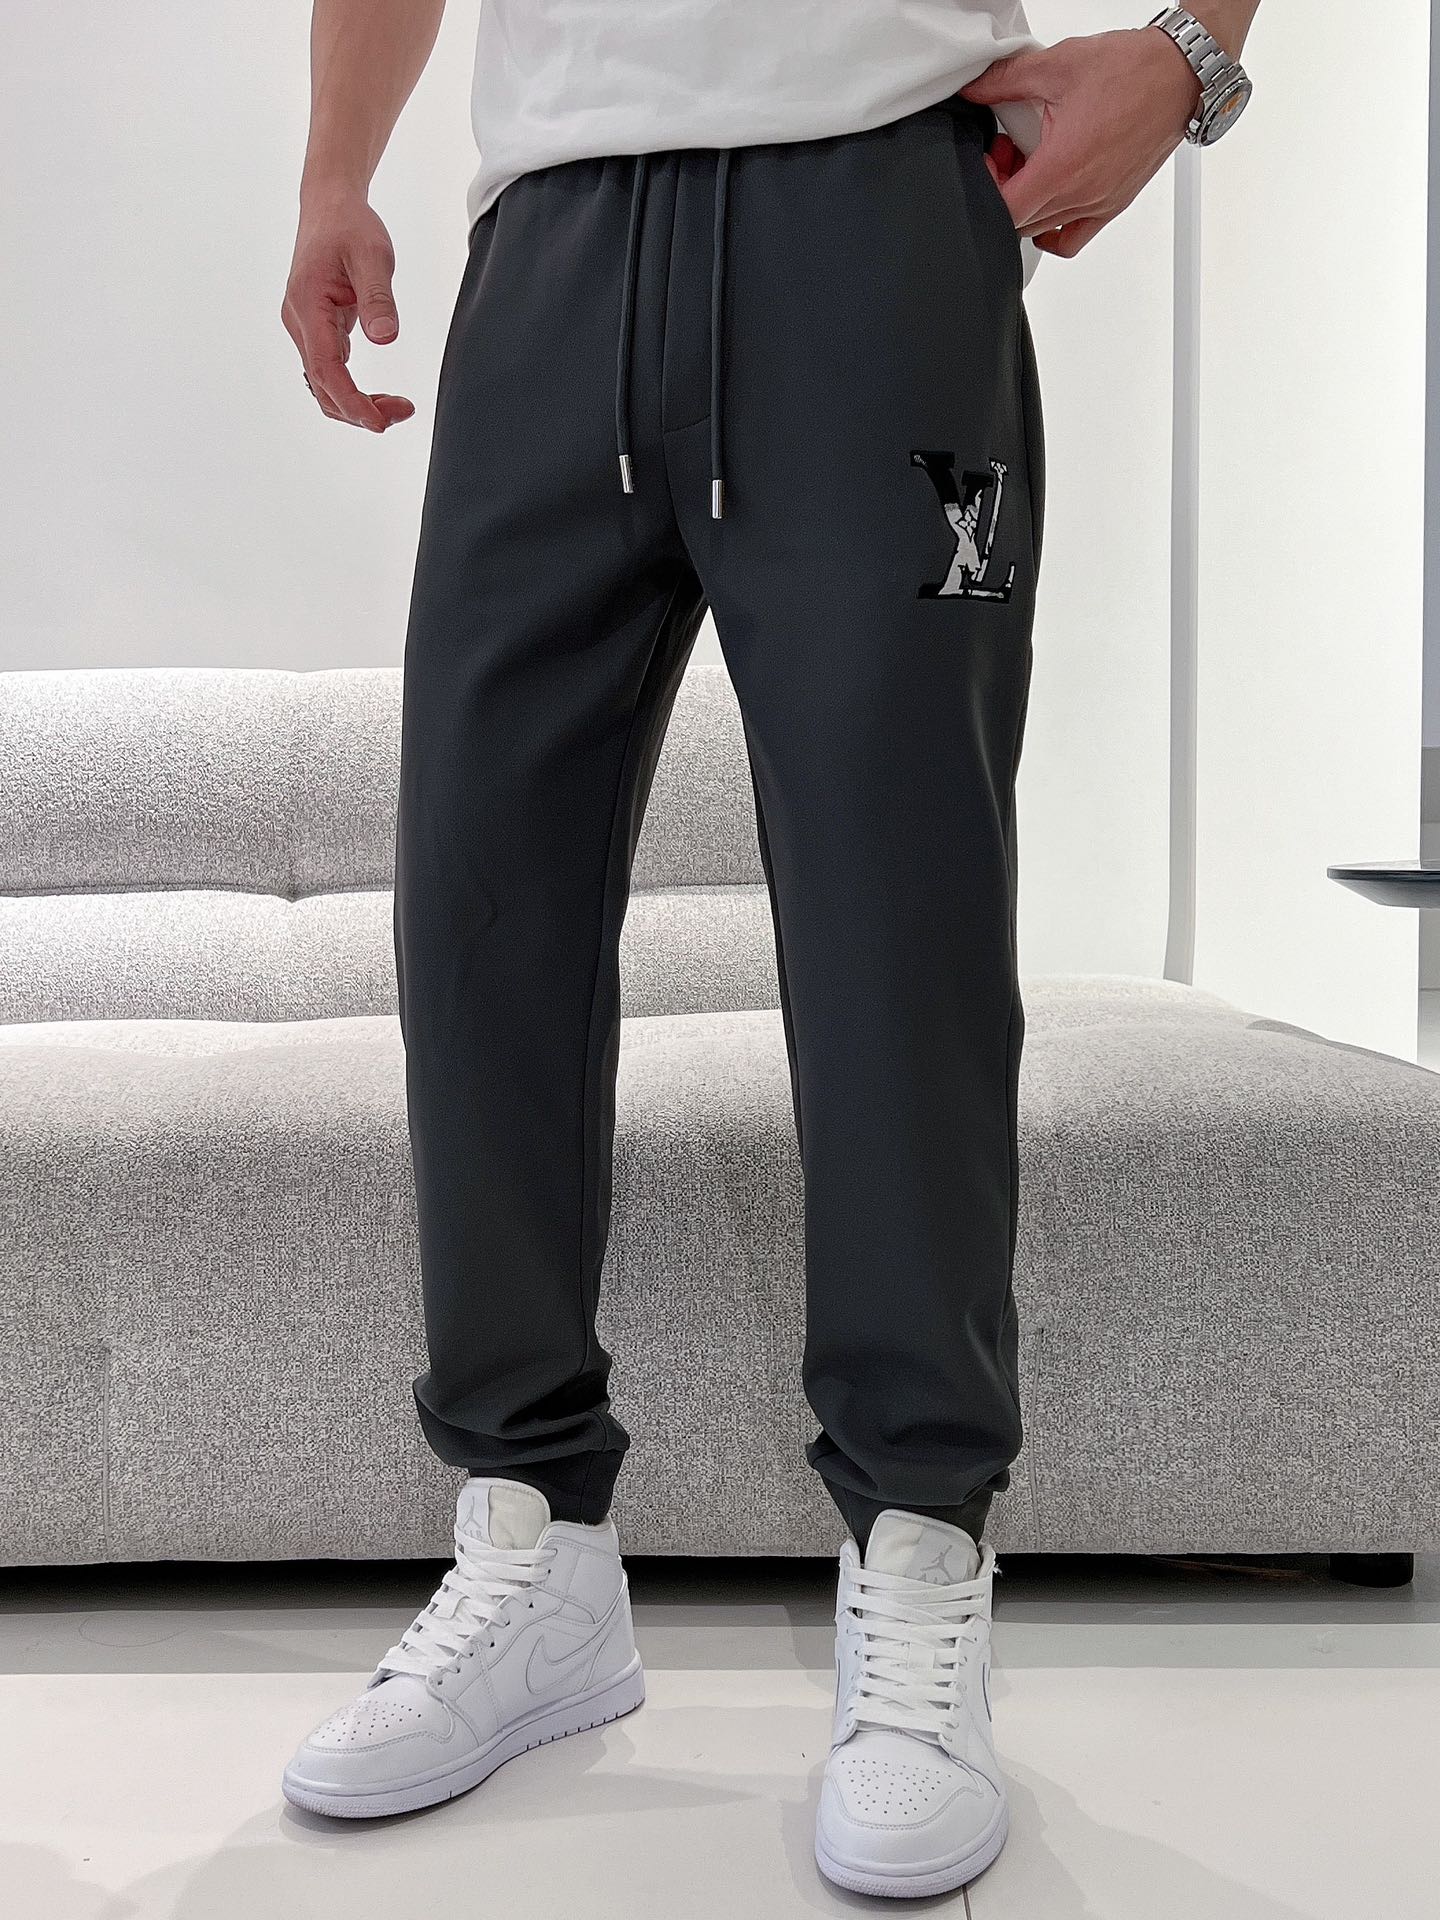 Louis Vuitton Clothing Pants & Trousers Black Grey Embroidery Cotton Spring/Summer Collection Fashion Casual